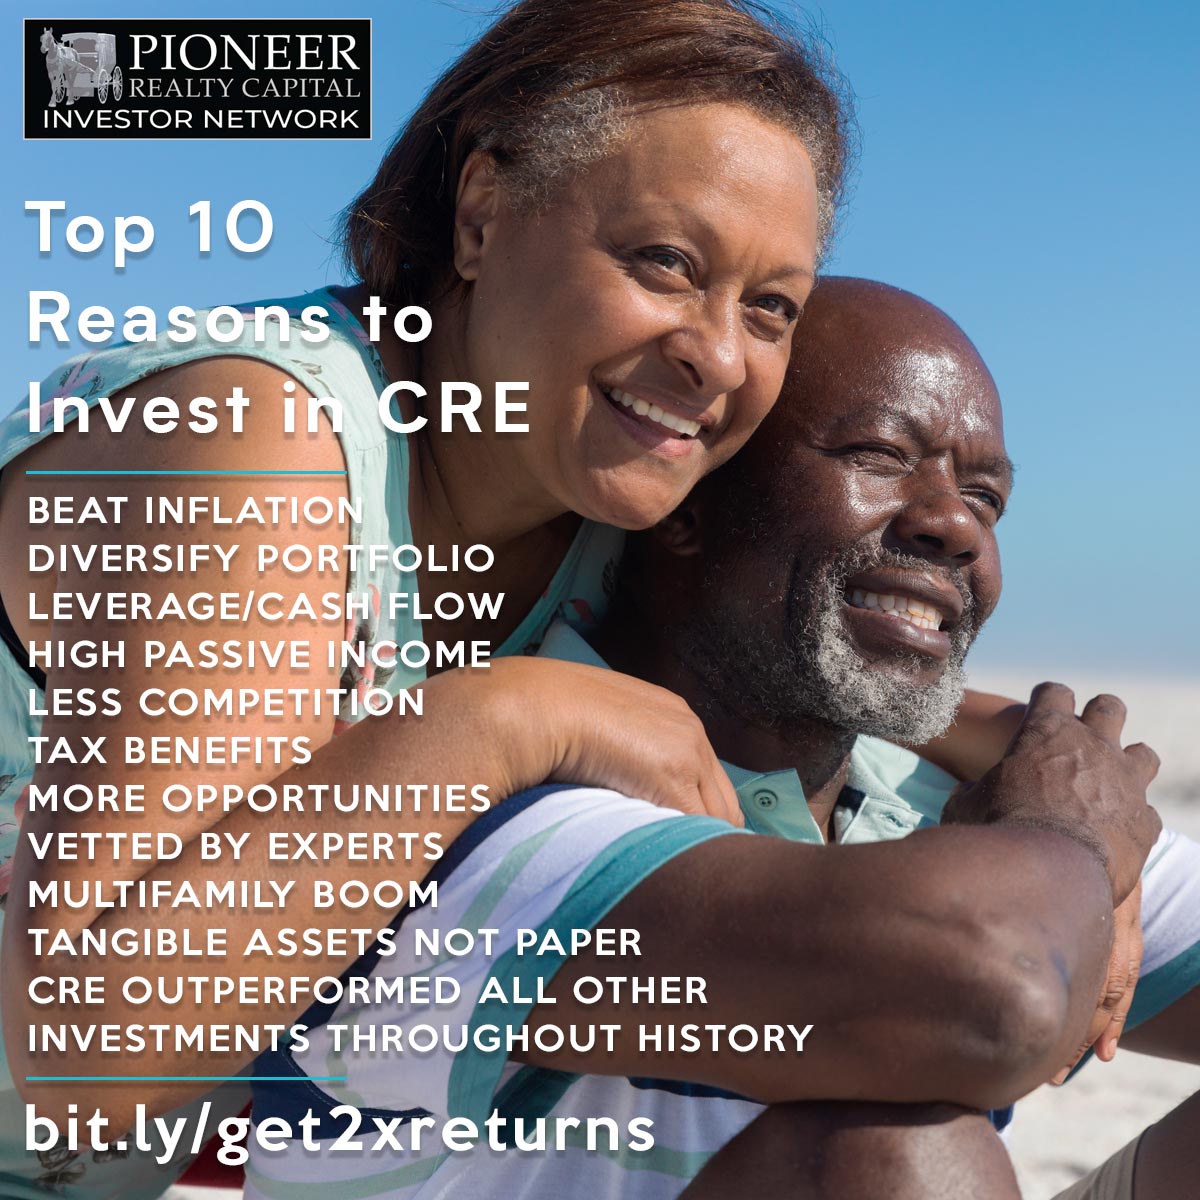 Get Started With Multifamily Investing with The PRC Investor Network for Accredited Investors